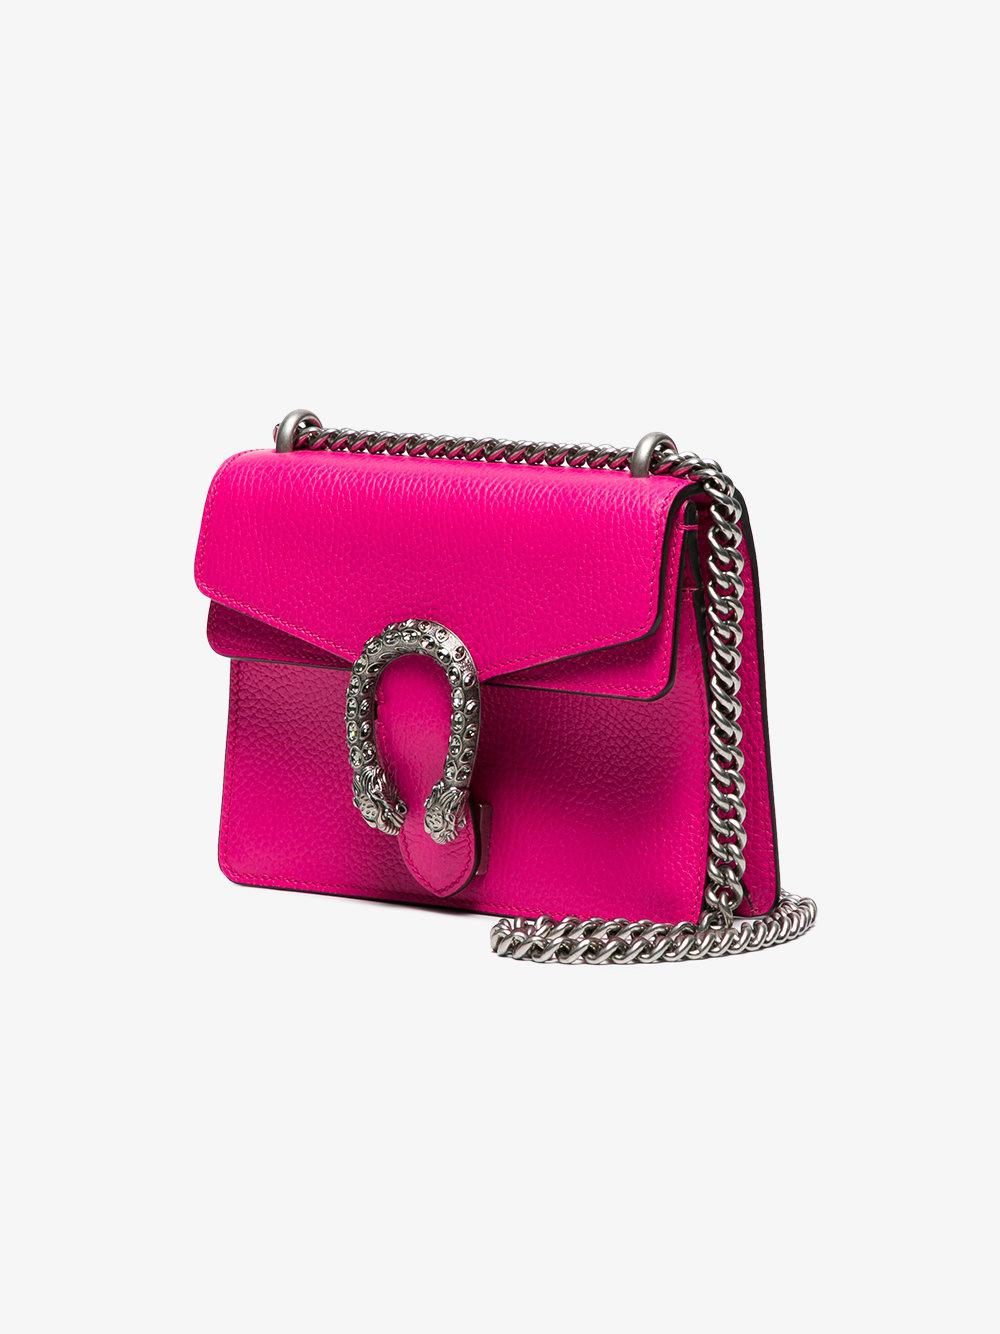 Gucci Pink Dionysus Small Leather Shoulder Bag Lyst